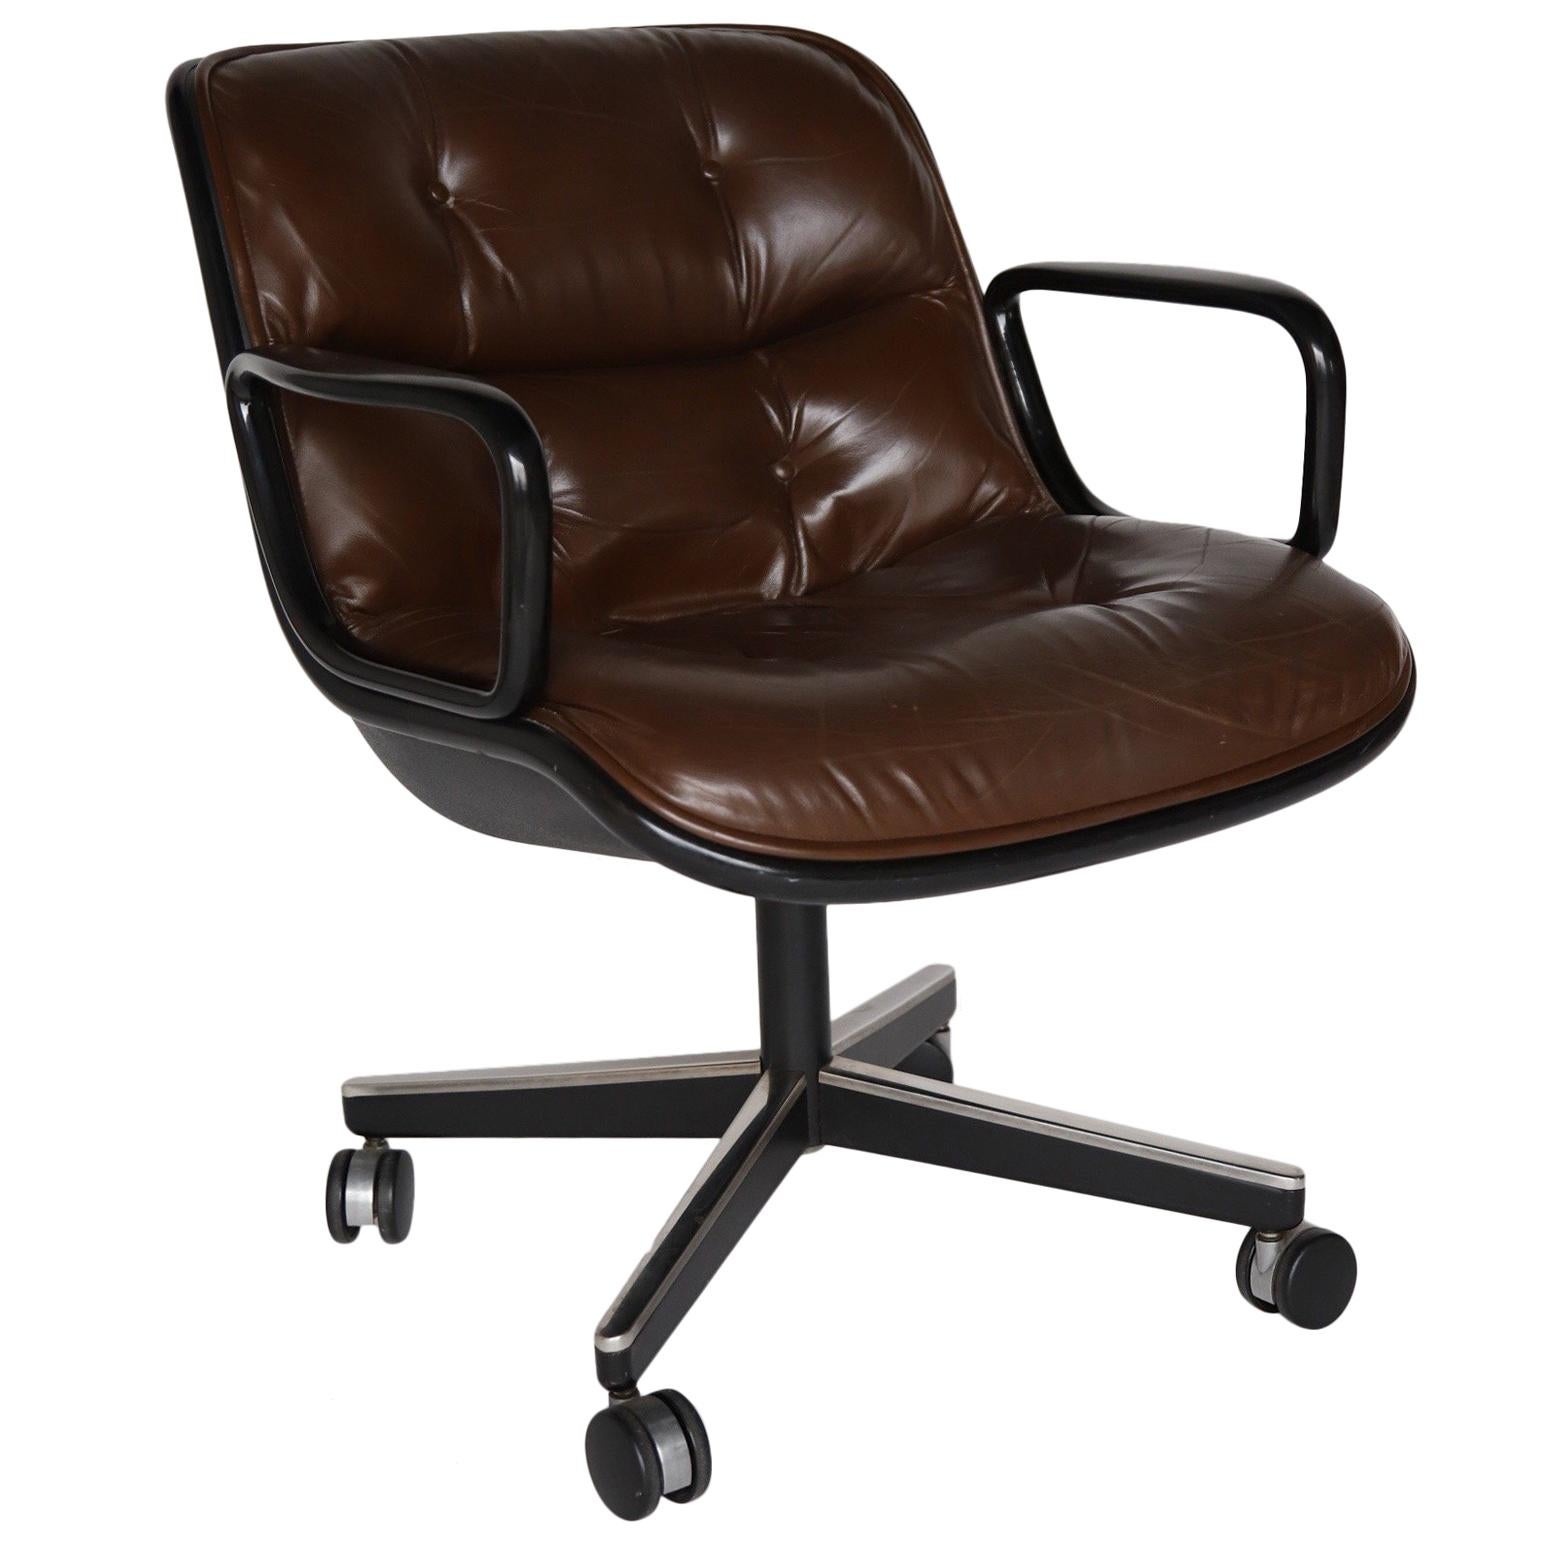 Charles Pollock Office Chair for Knoll